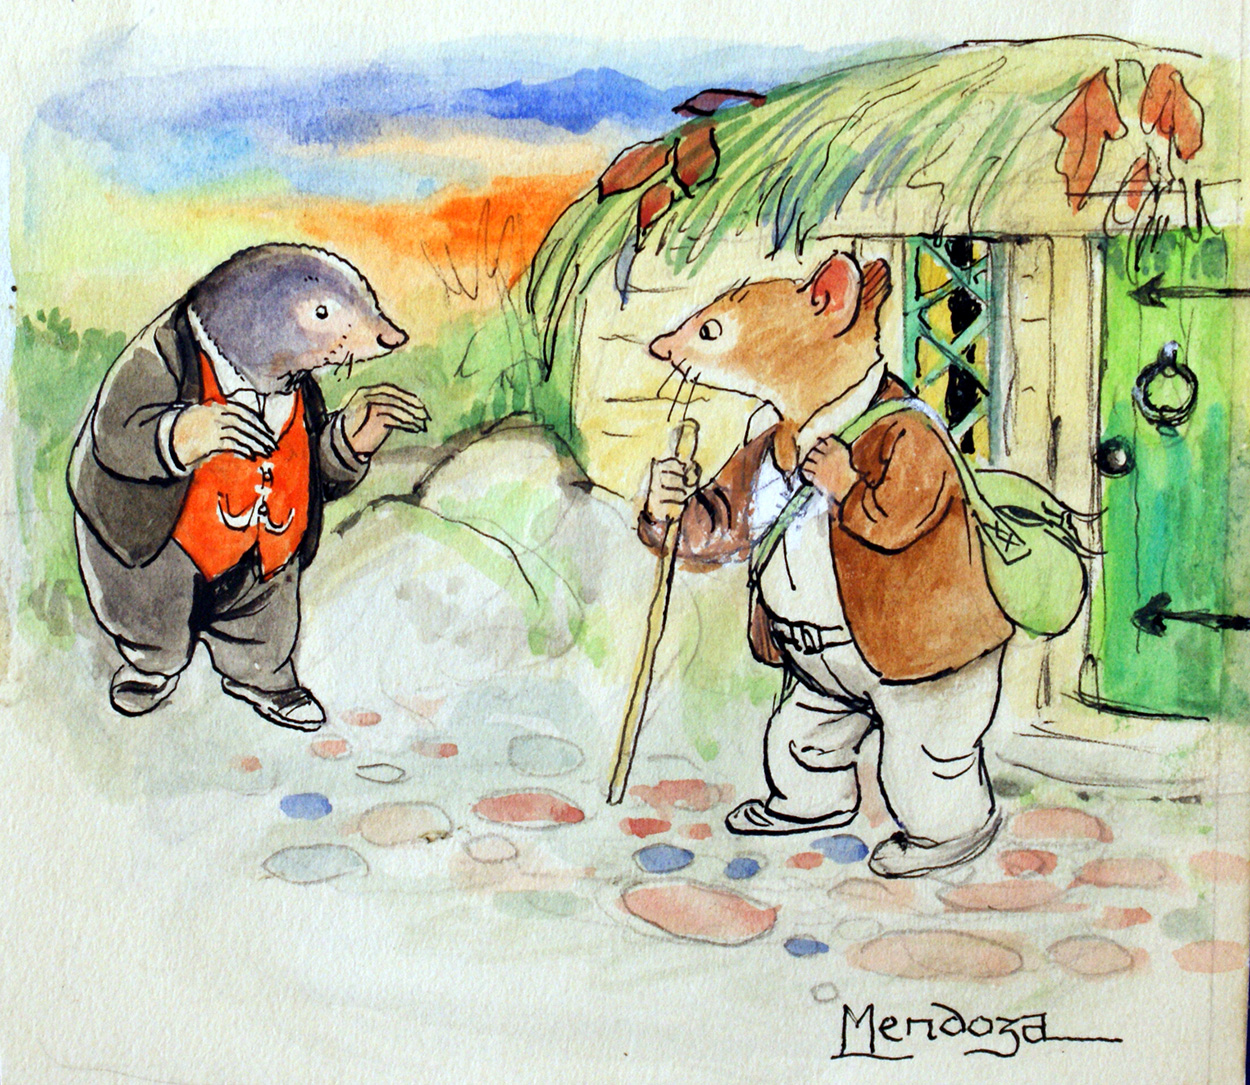 The Wind in the Willows: Rat and Mole Meet (Original) (Signed) art by Wind in the Willows (Mendoza) at The Illustration Art Gallery